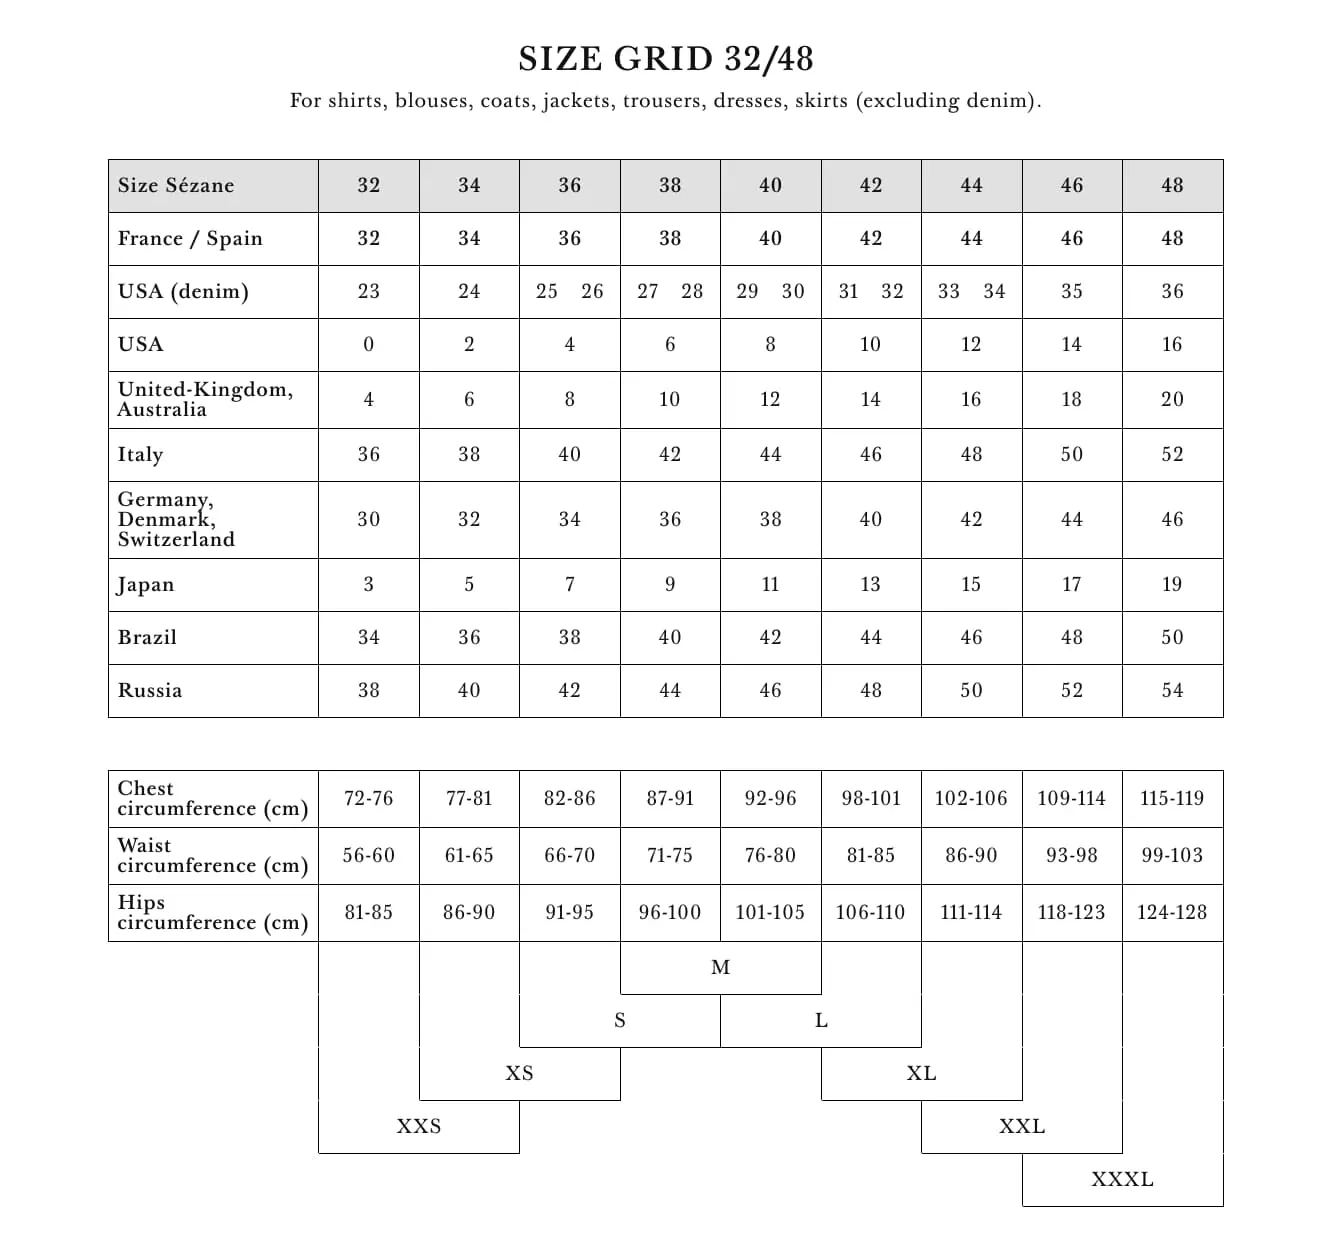 Sezane chart size : how to choose the right size?